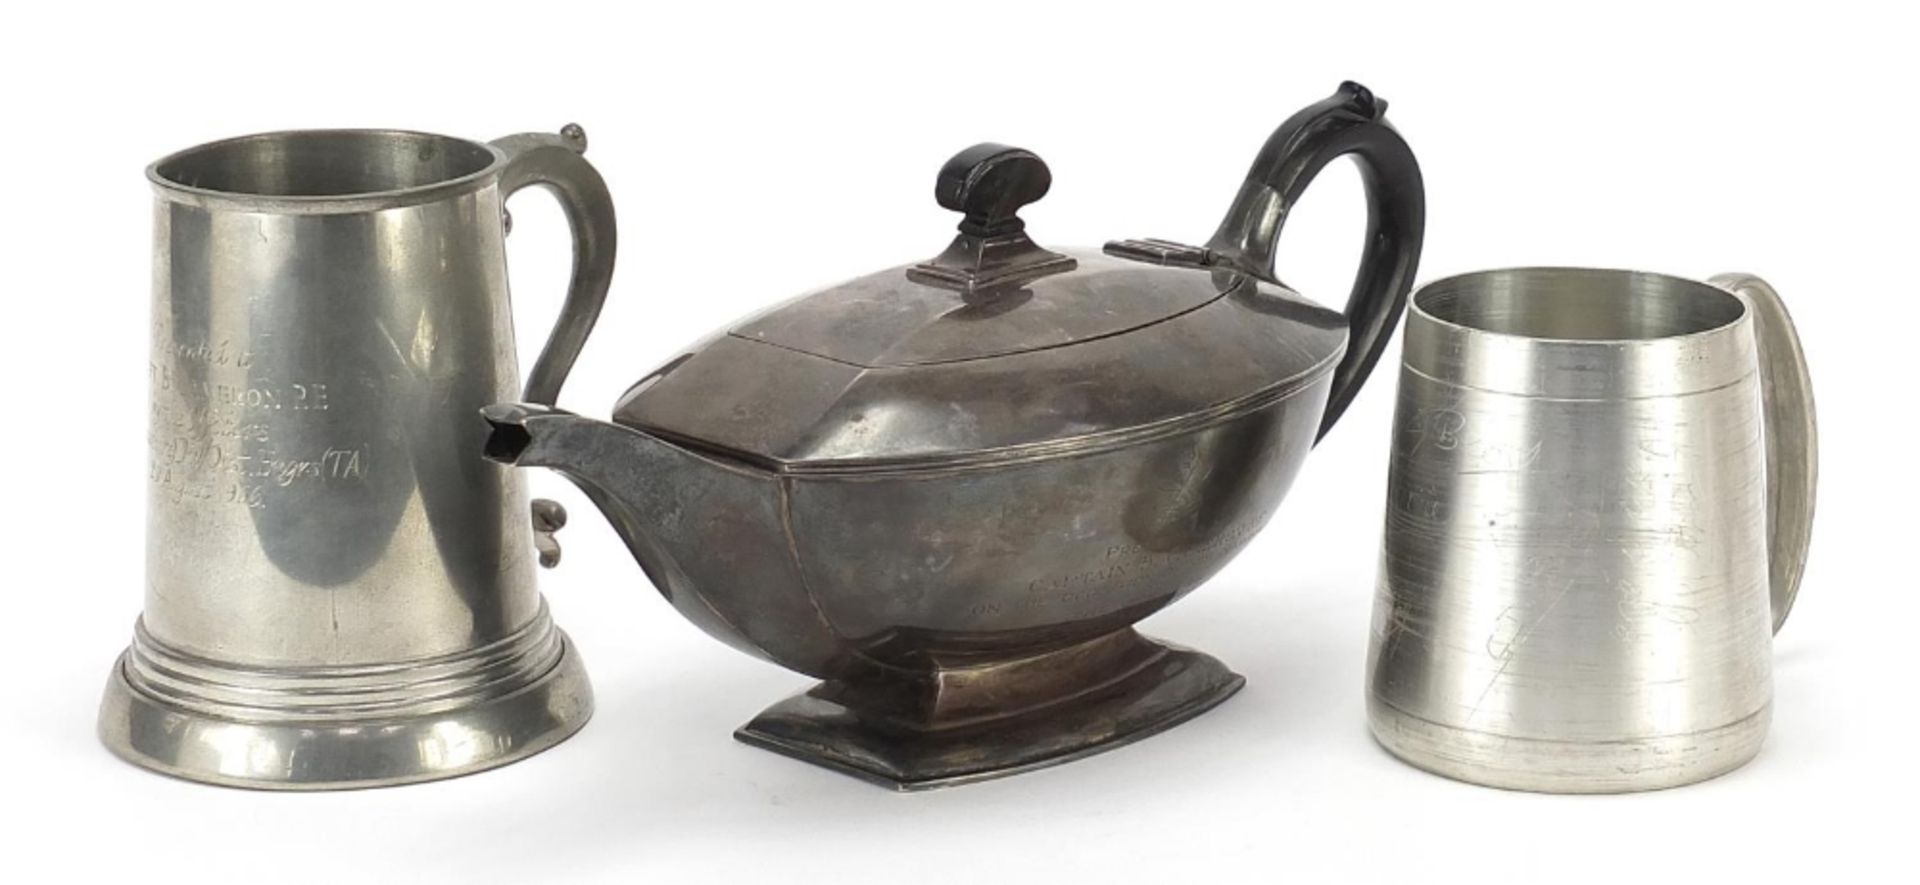 Military interest metalware presented to Captain B Cameron including a teapot presented by the